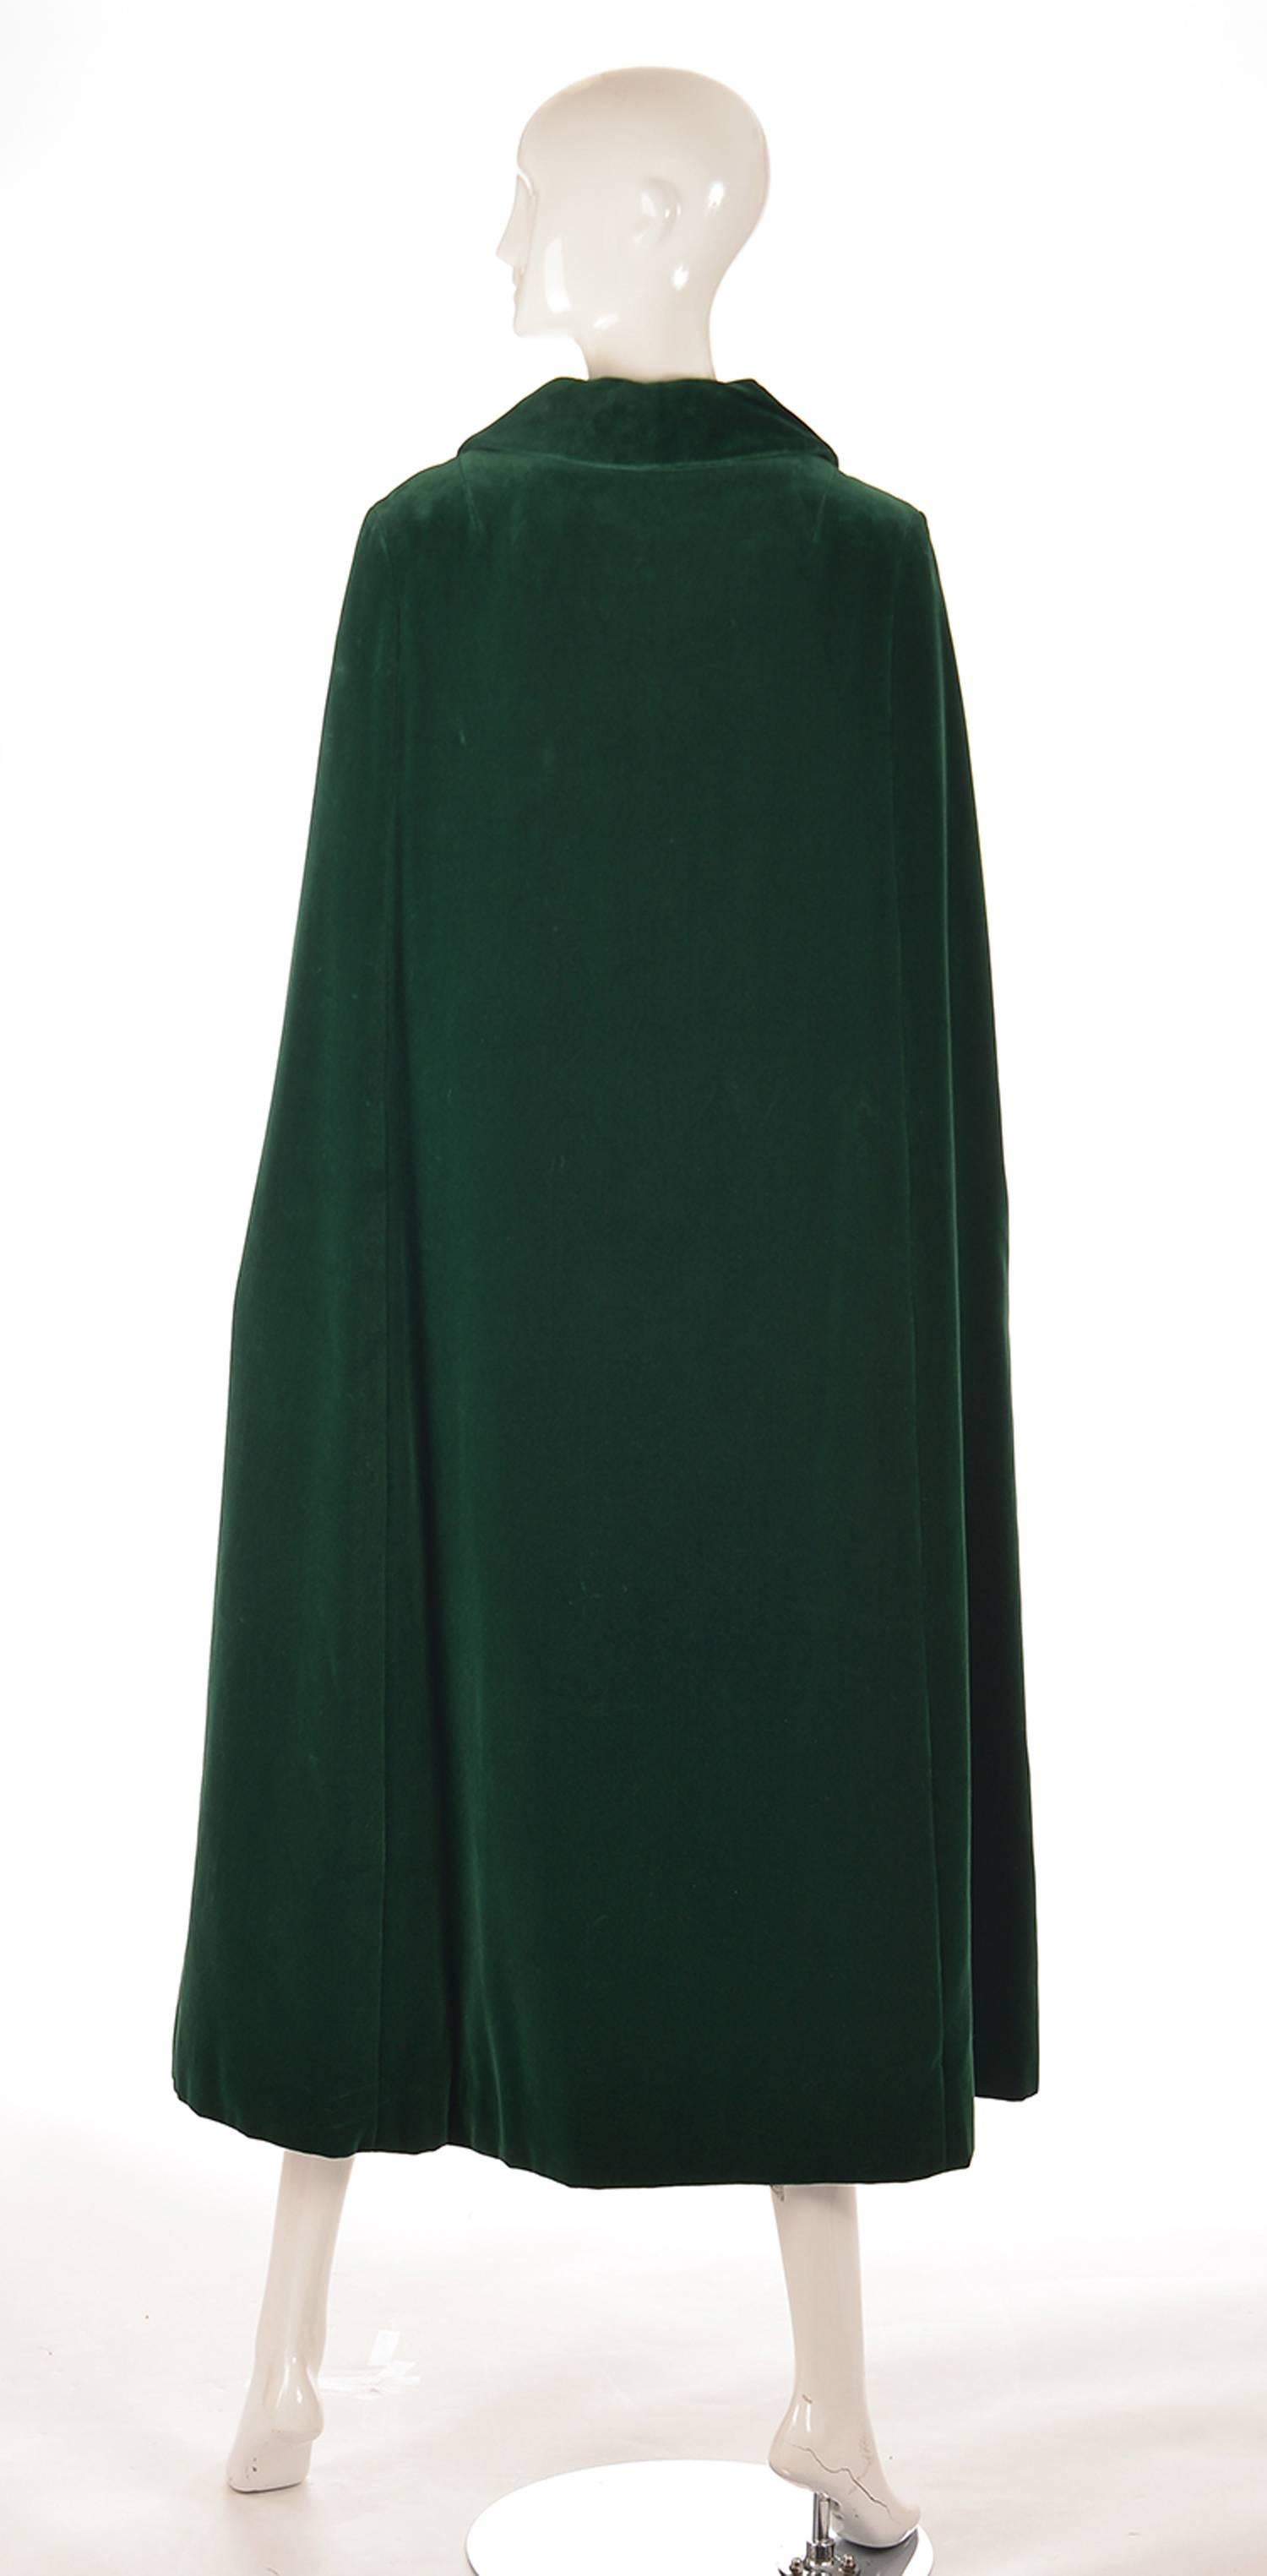 
This sumptuous, emerald green, velvet cloak is calf length, and features a long collar that can be turned up and held with a black carved glass button. The cloak features three large buttons composed of a cluster of green rhinestones Richard Kerr